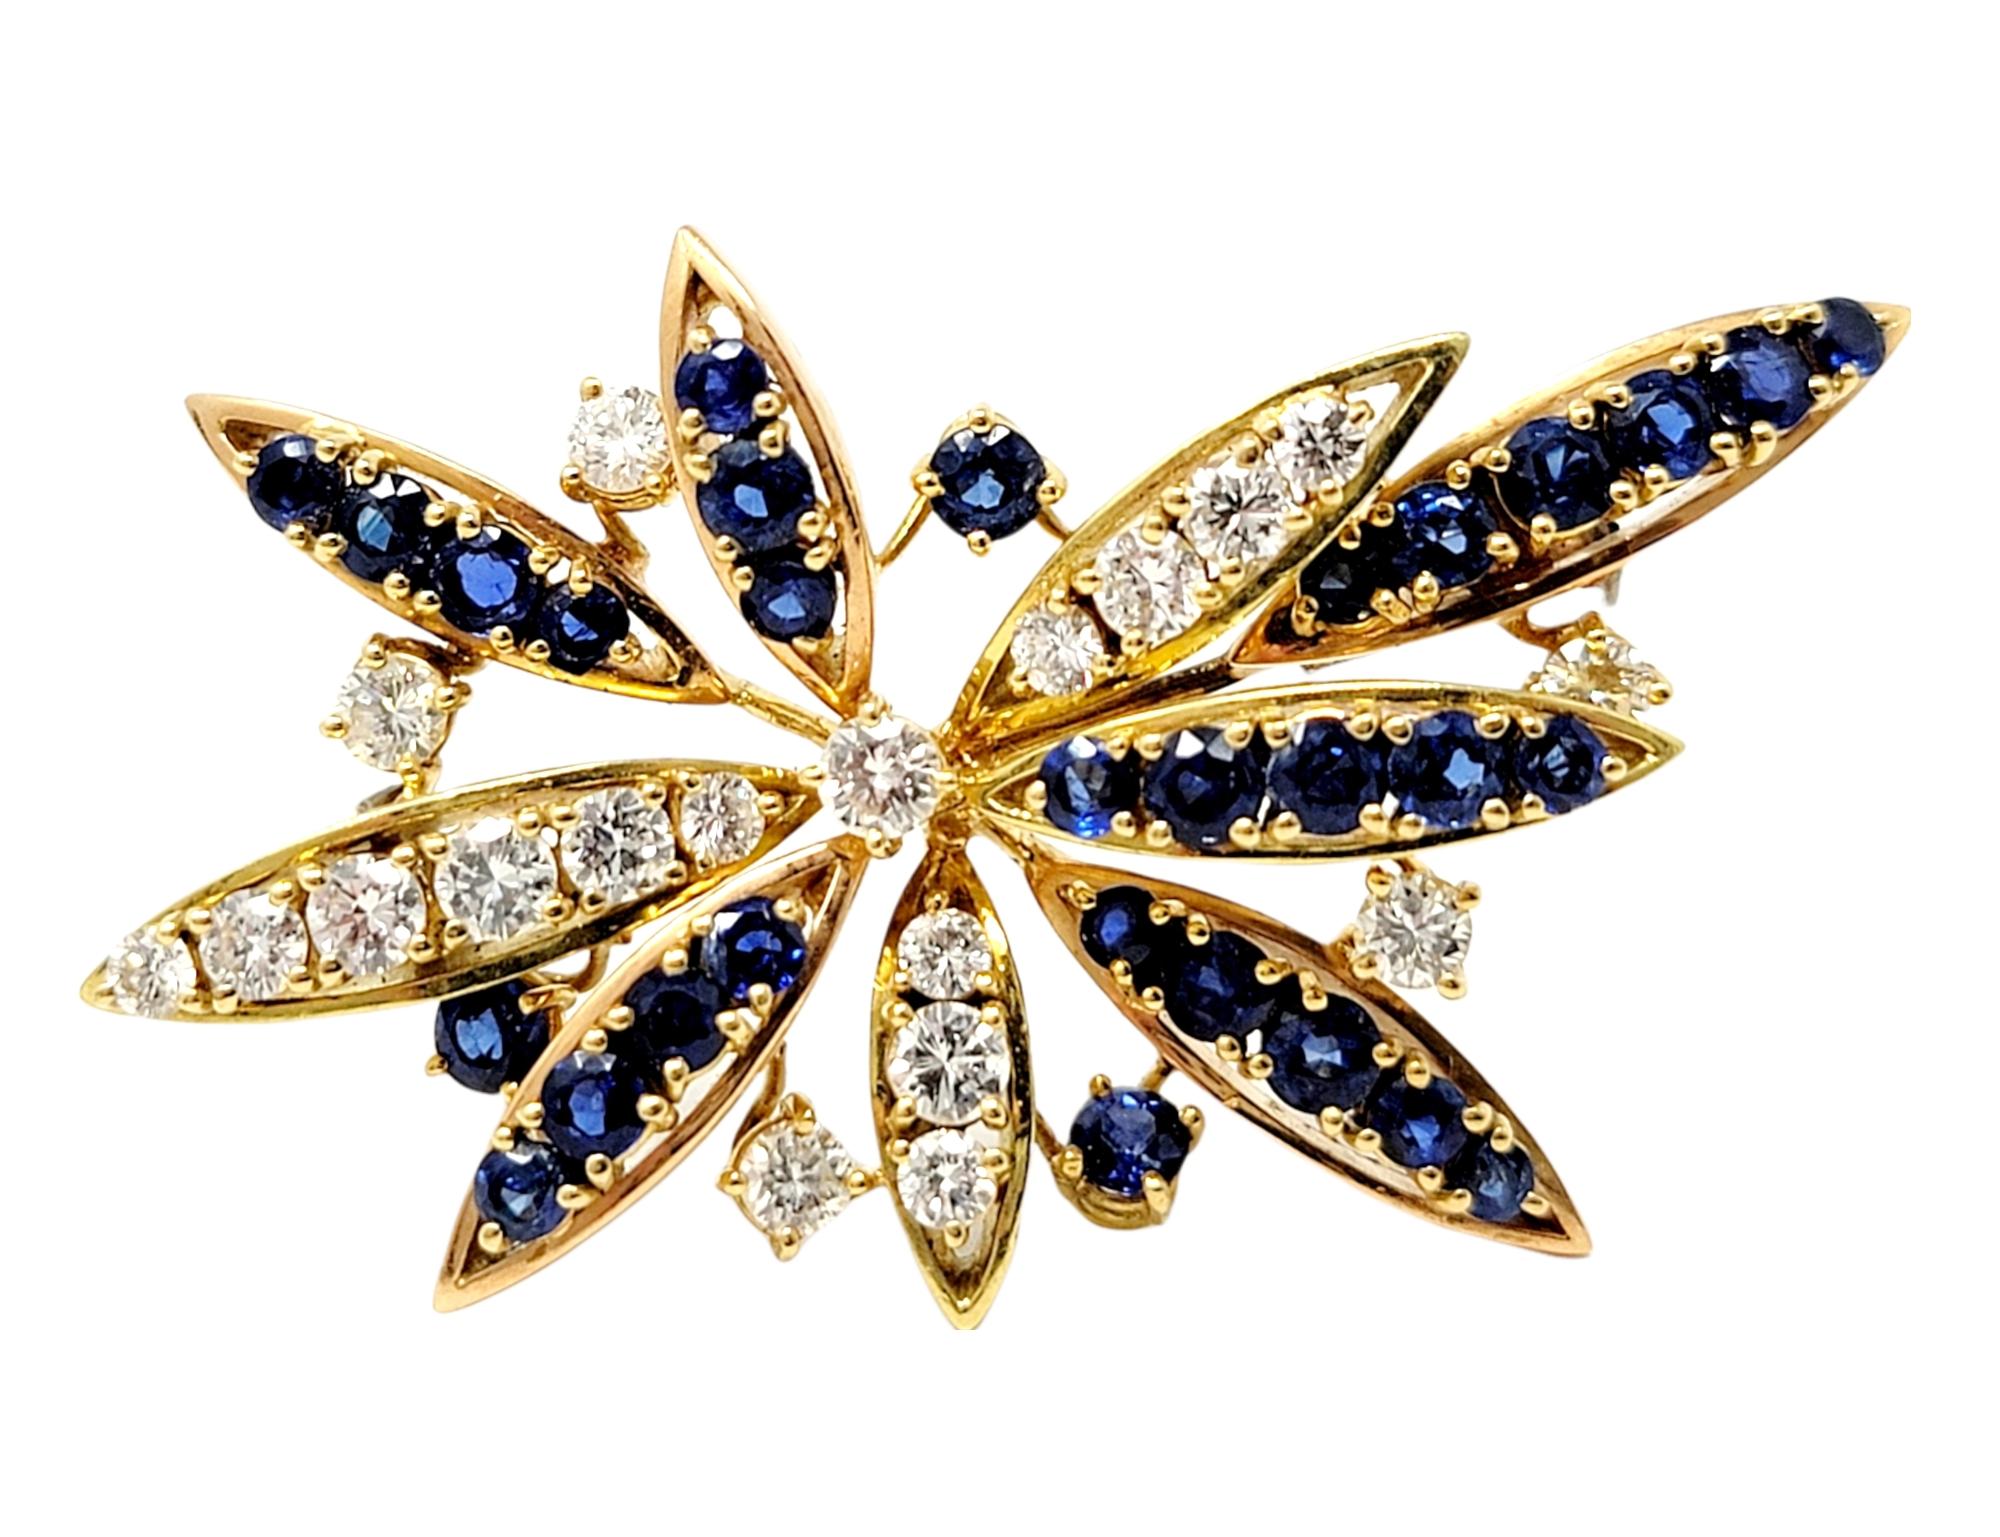 Absolutely exquisite sapphire and diamond floral motif spray brooch. This gorgeous, shimmering piece is bursting with both color and sparkle.  The elegant brooch features multiple layers of elongated, embellished 'petals' prong set with round mixed